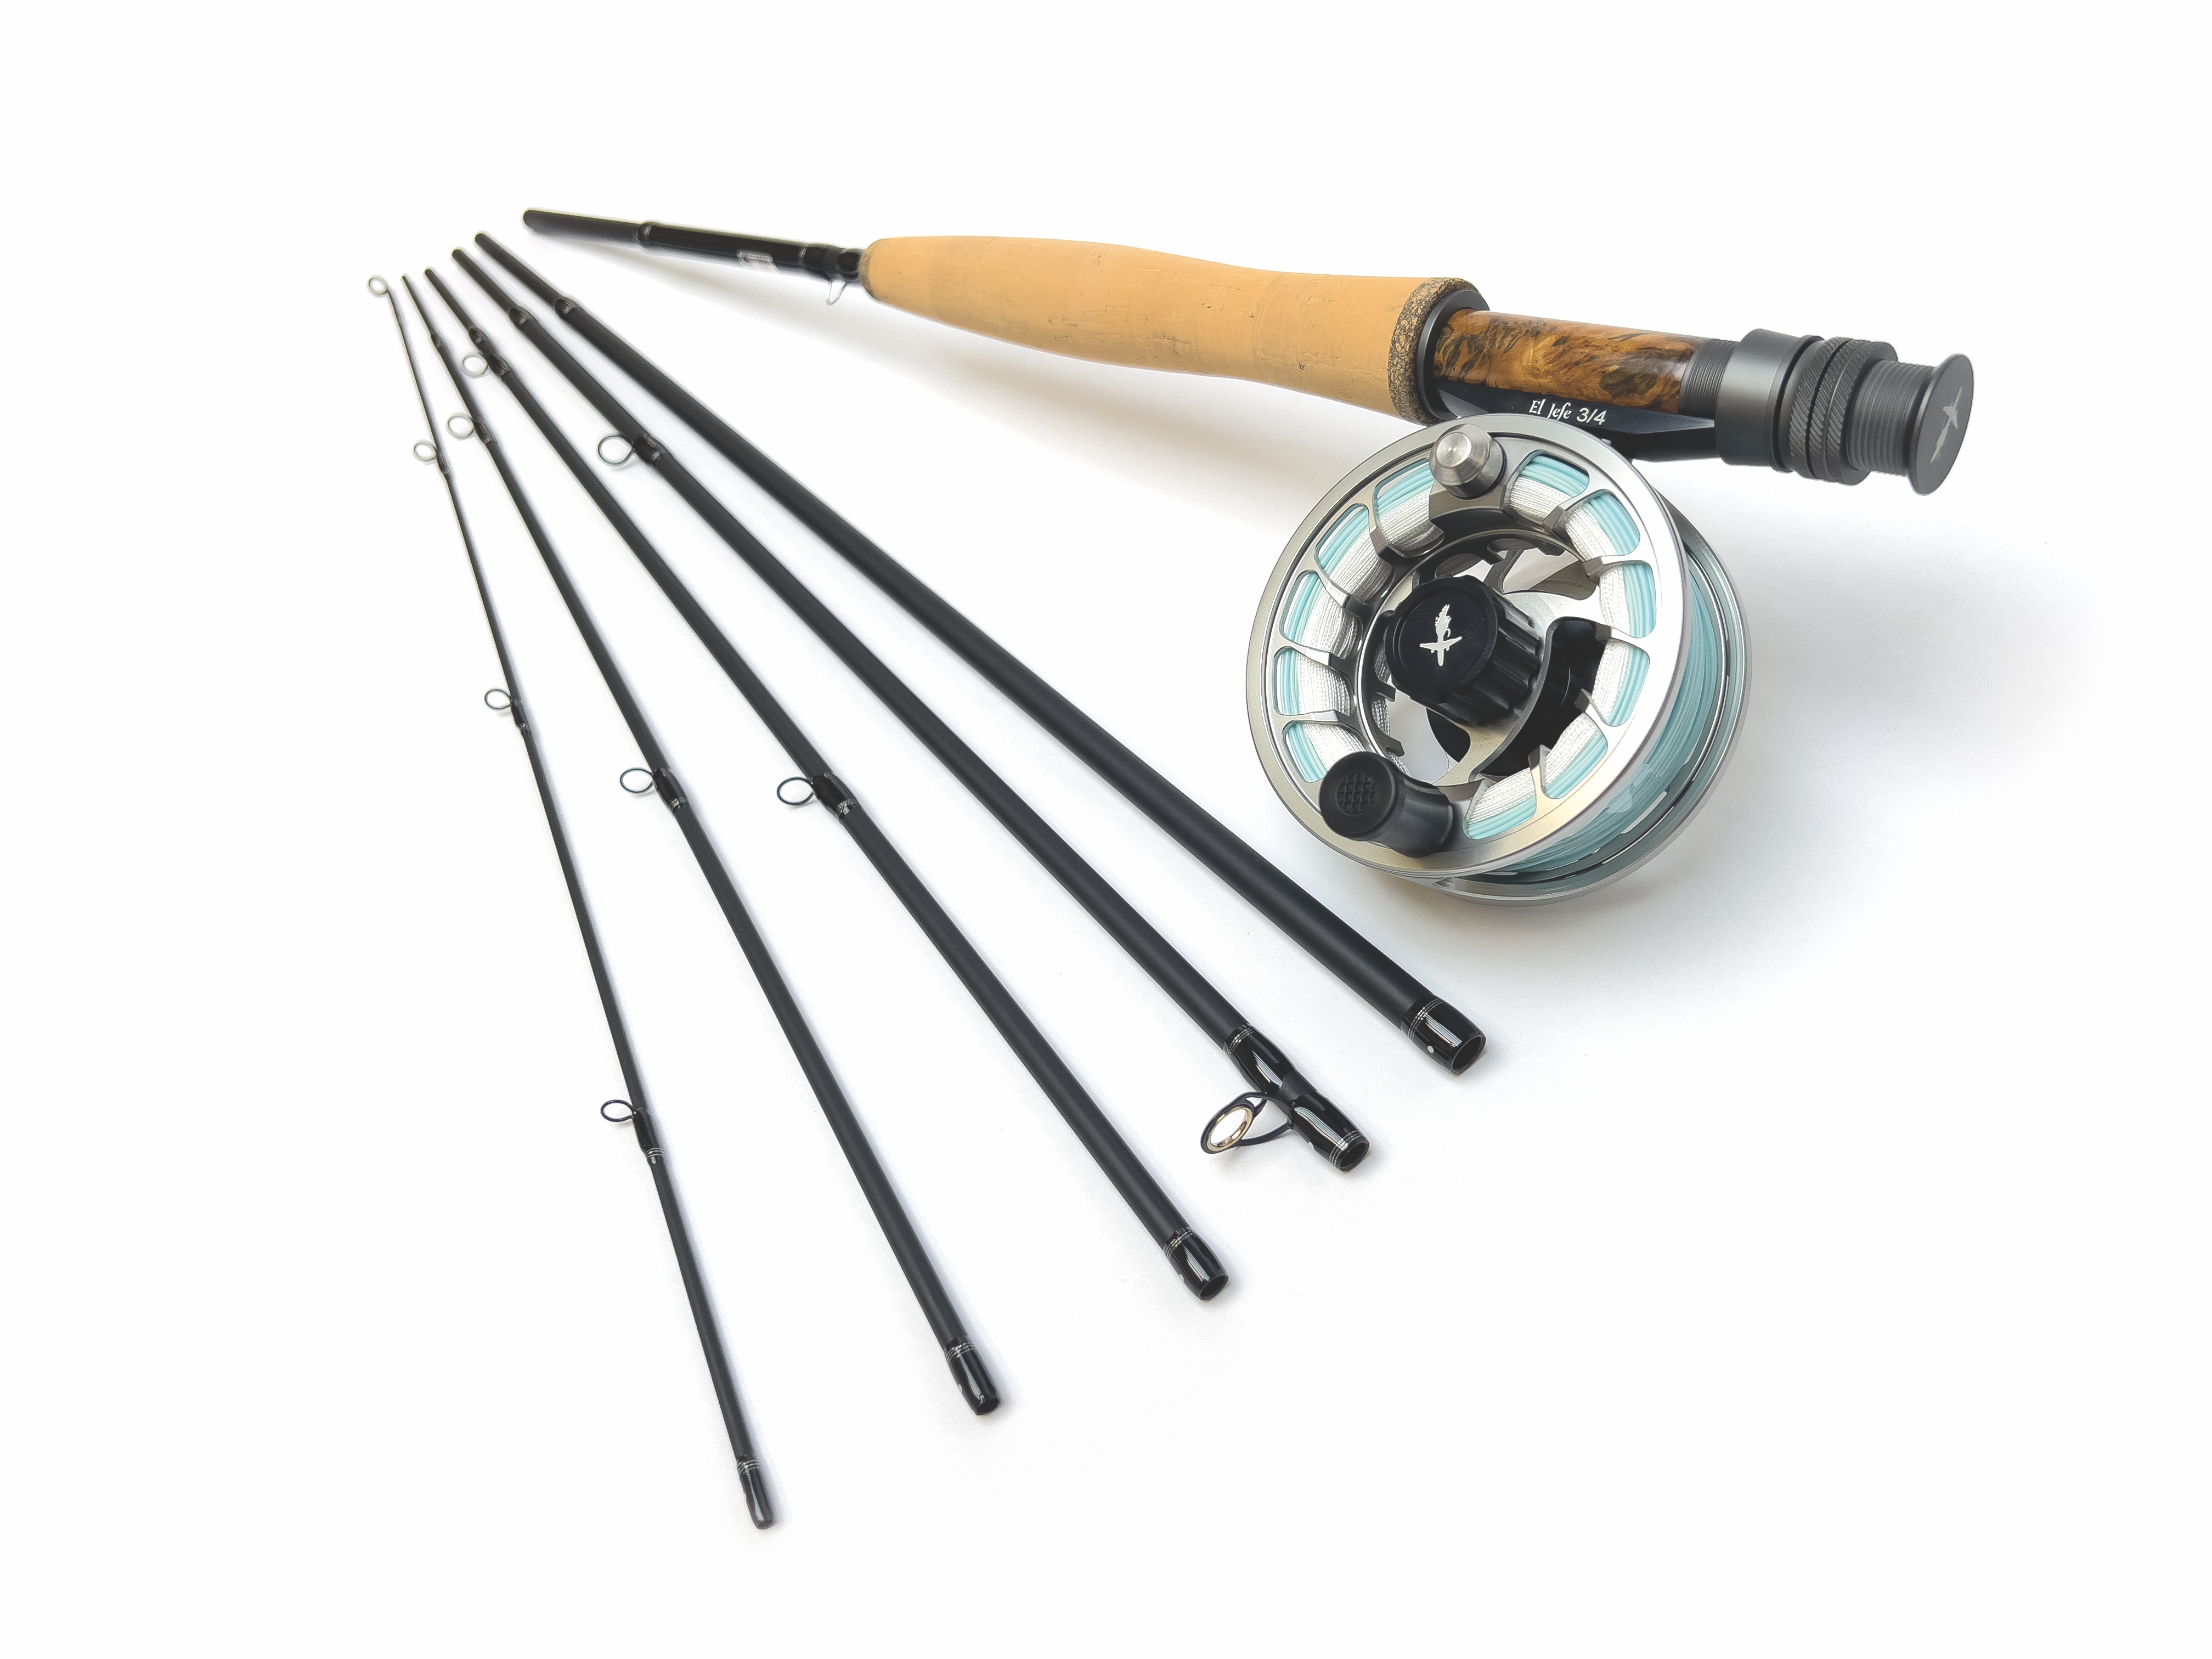 El Jefe Fly Fishing Combo Package | 766-3 | 7'6 Six Section 3 Weight Fly  Rod And Reel Outfit